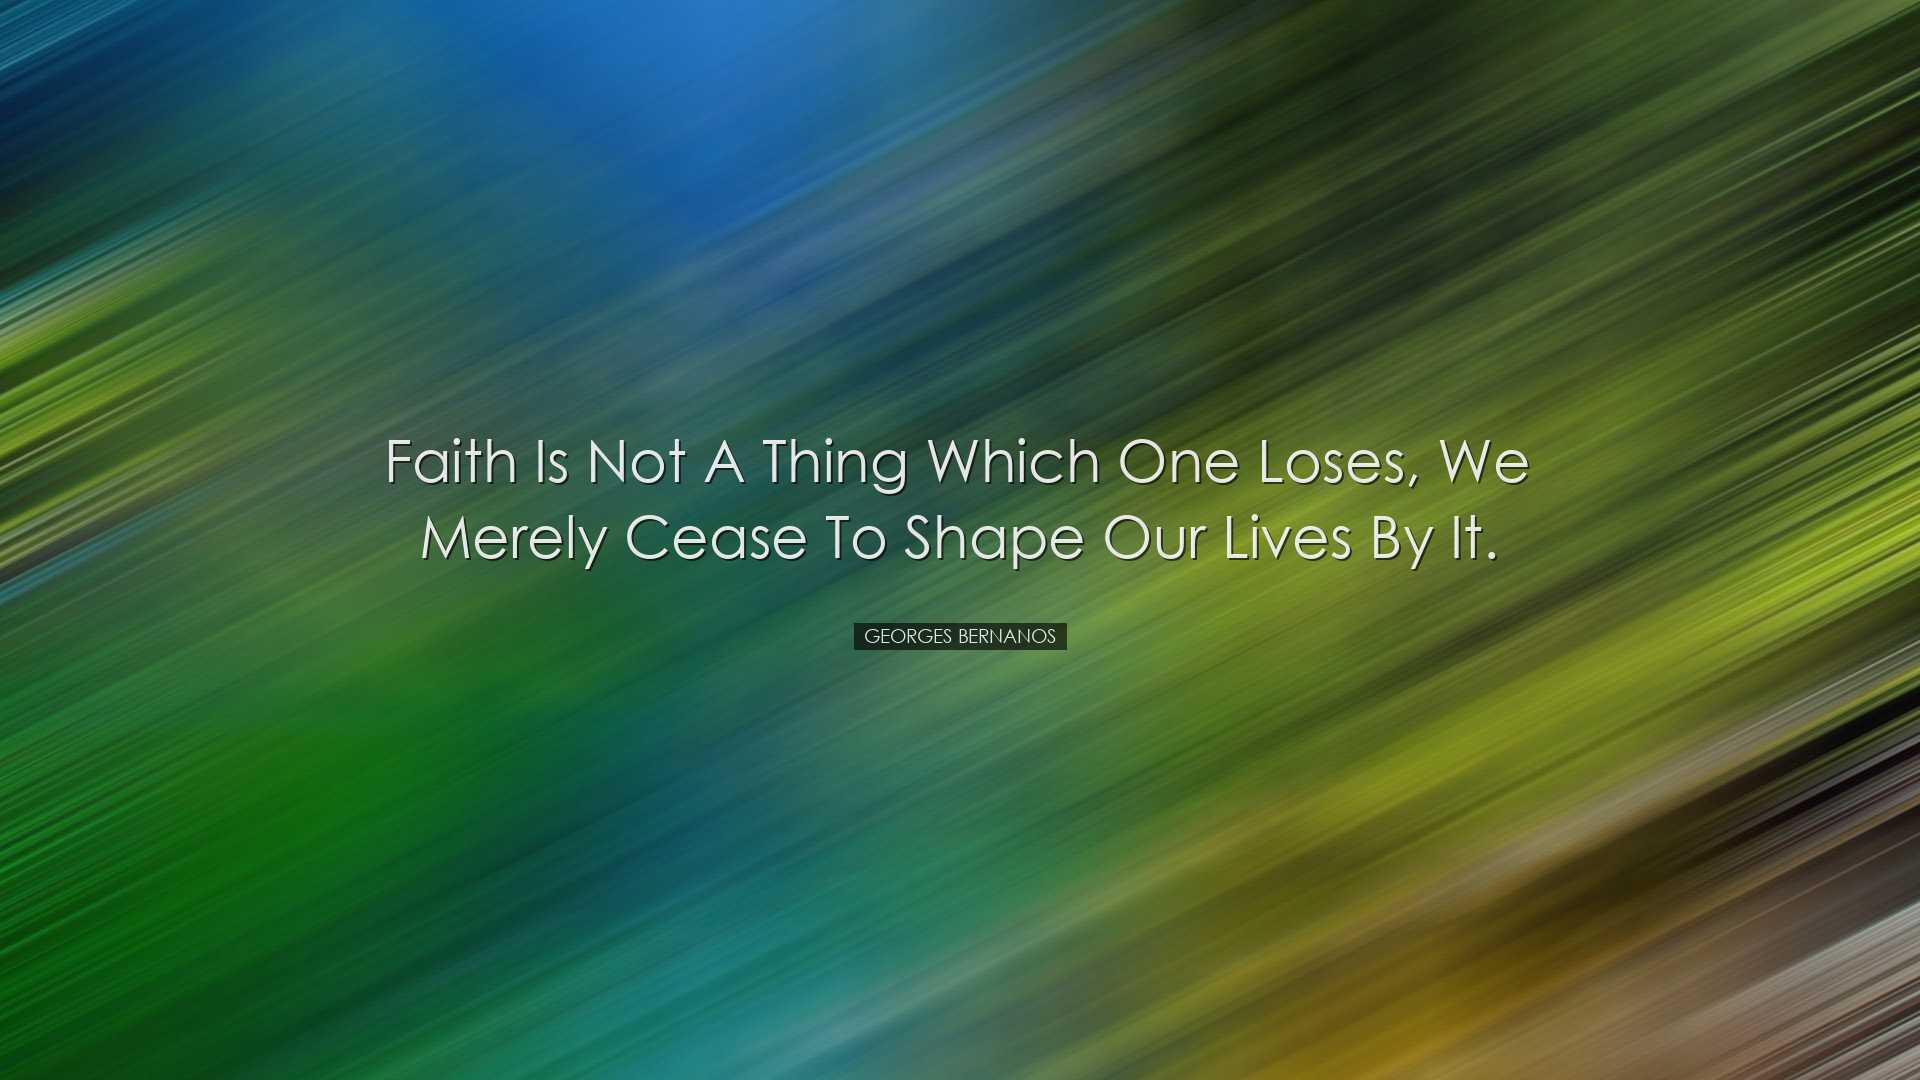 Faith is not a thing which one loses, we merely cease to shape our